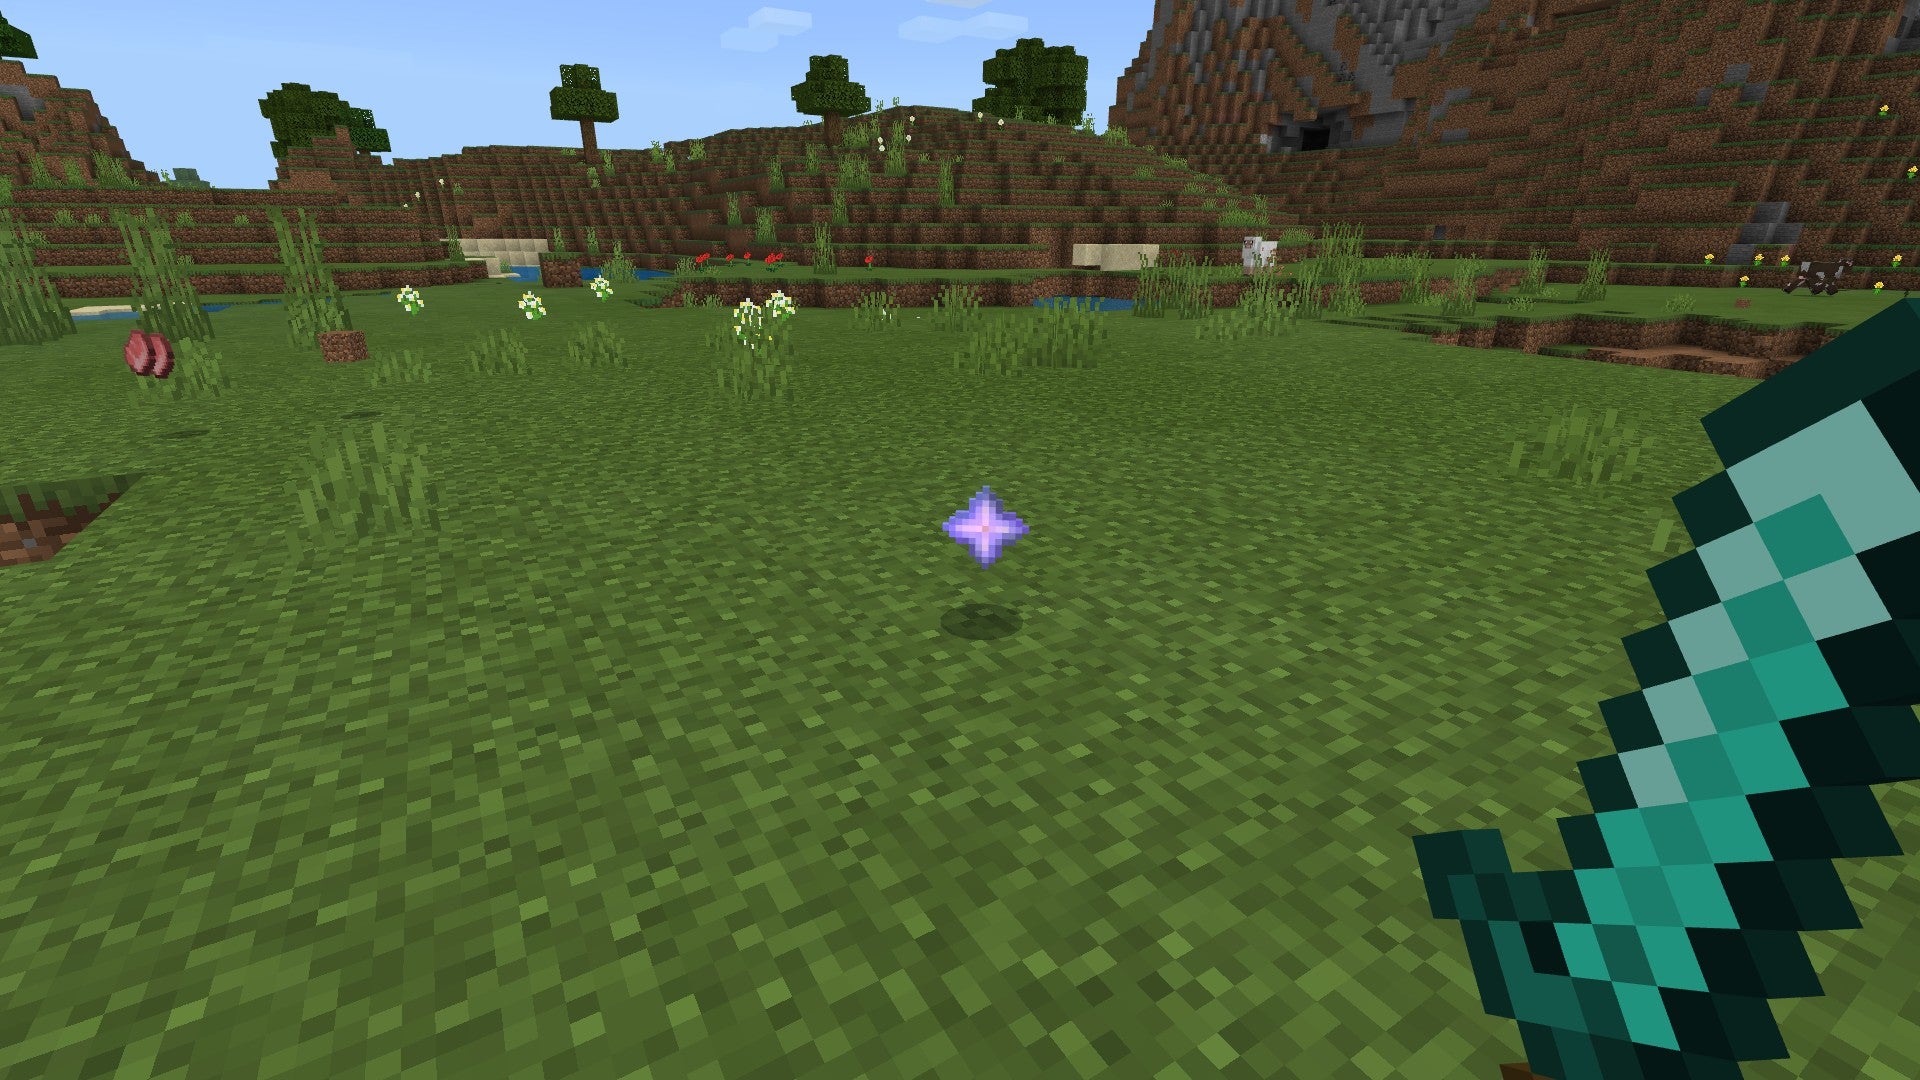 Minecraft nether star in plains biome